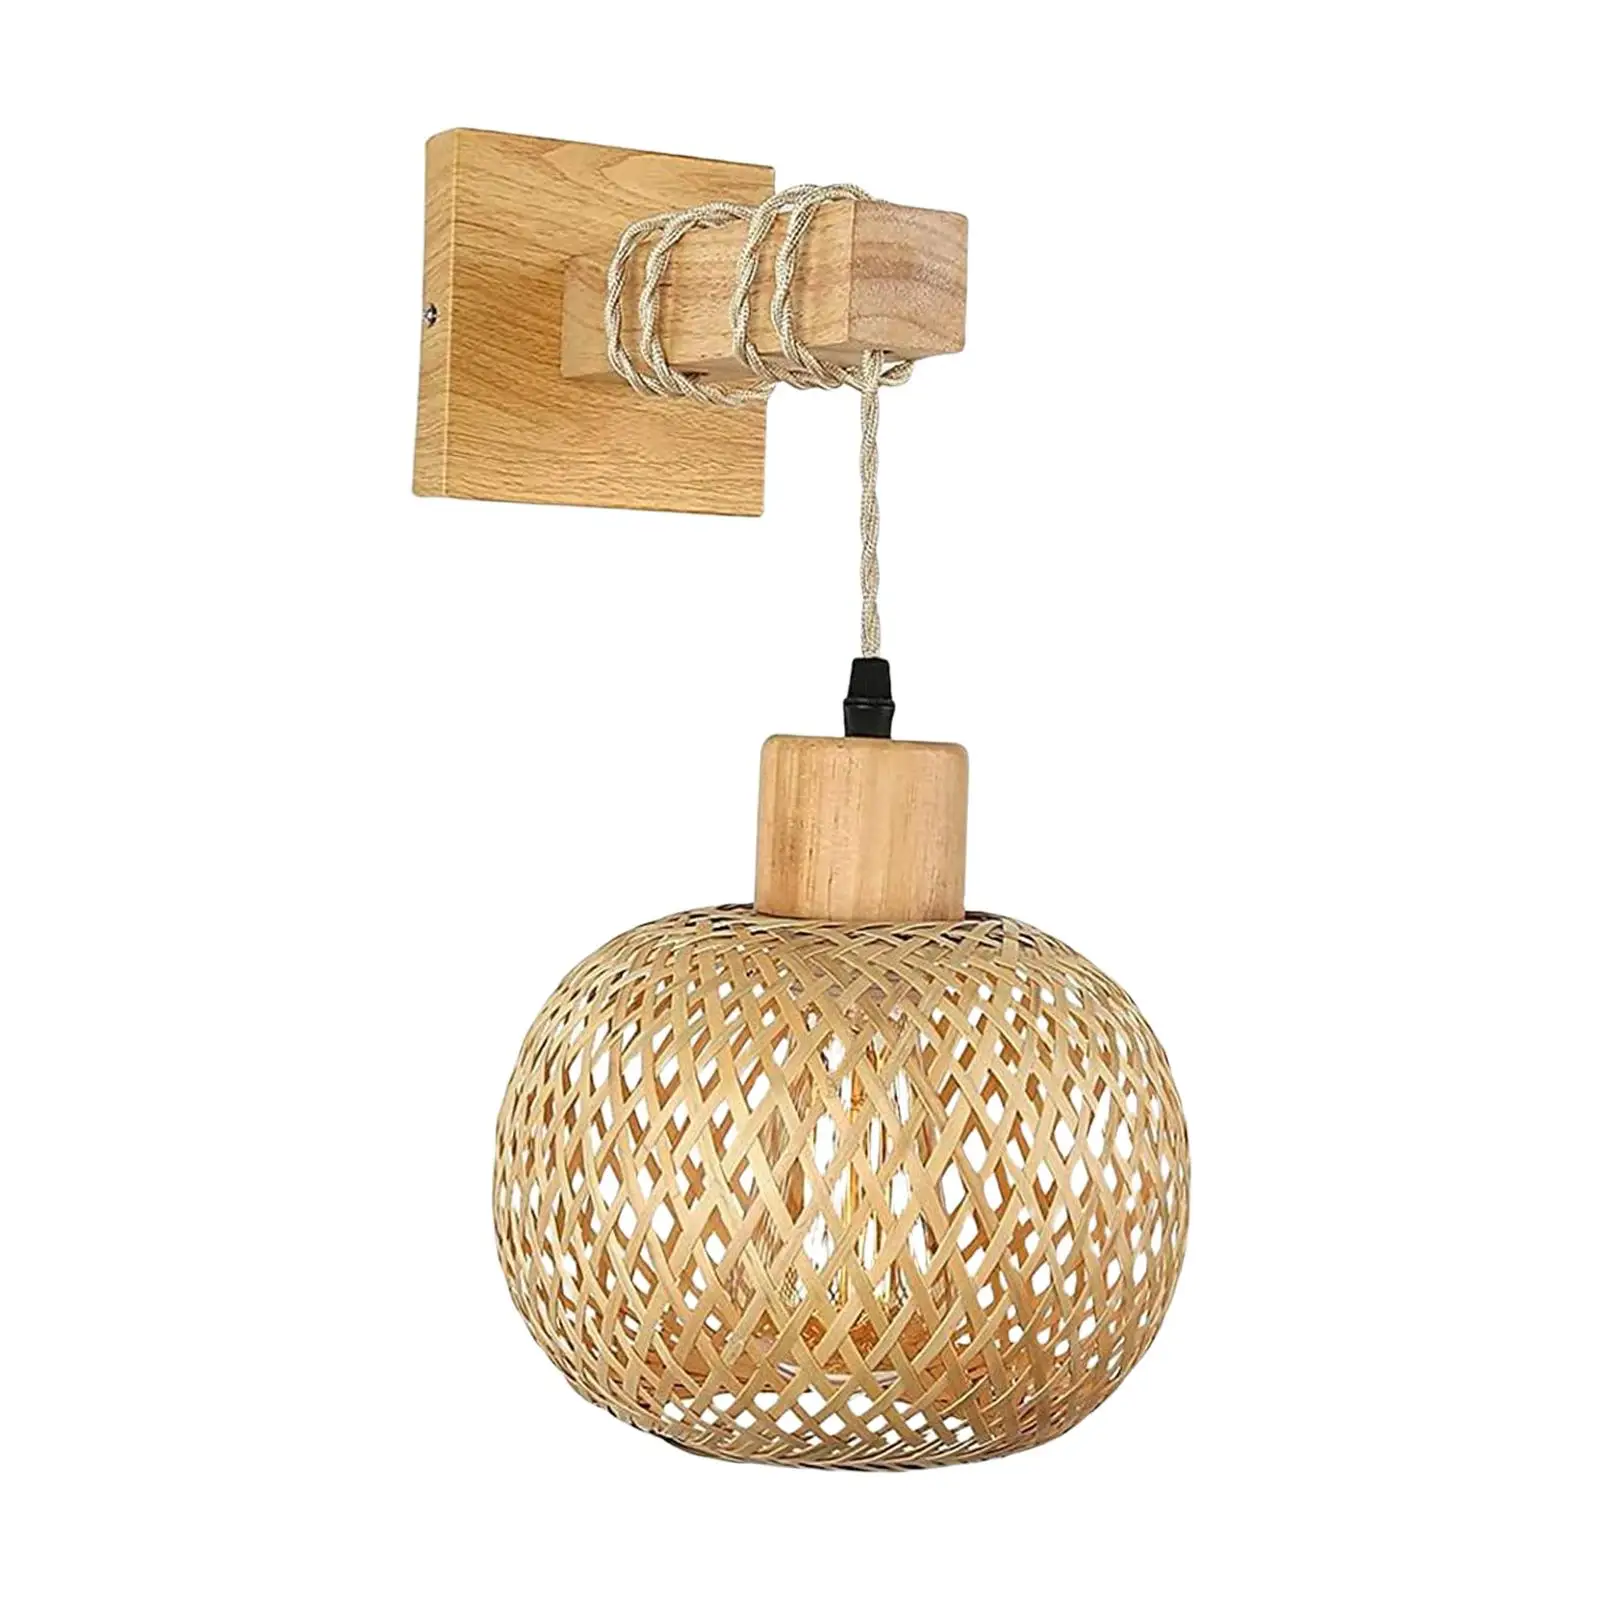 Retro Rattan Wall Sconce Light Fixture Rustic Bamboo Hand Woven for Bedroom